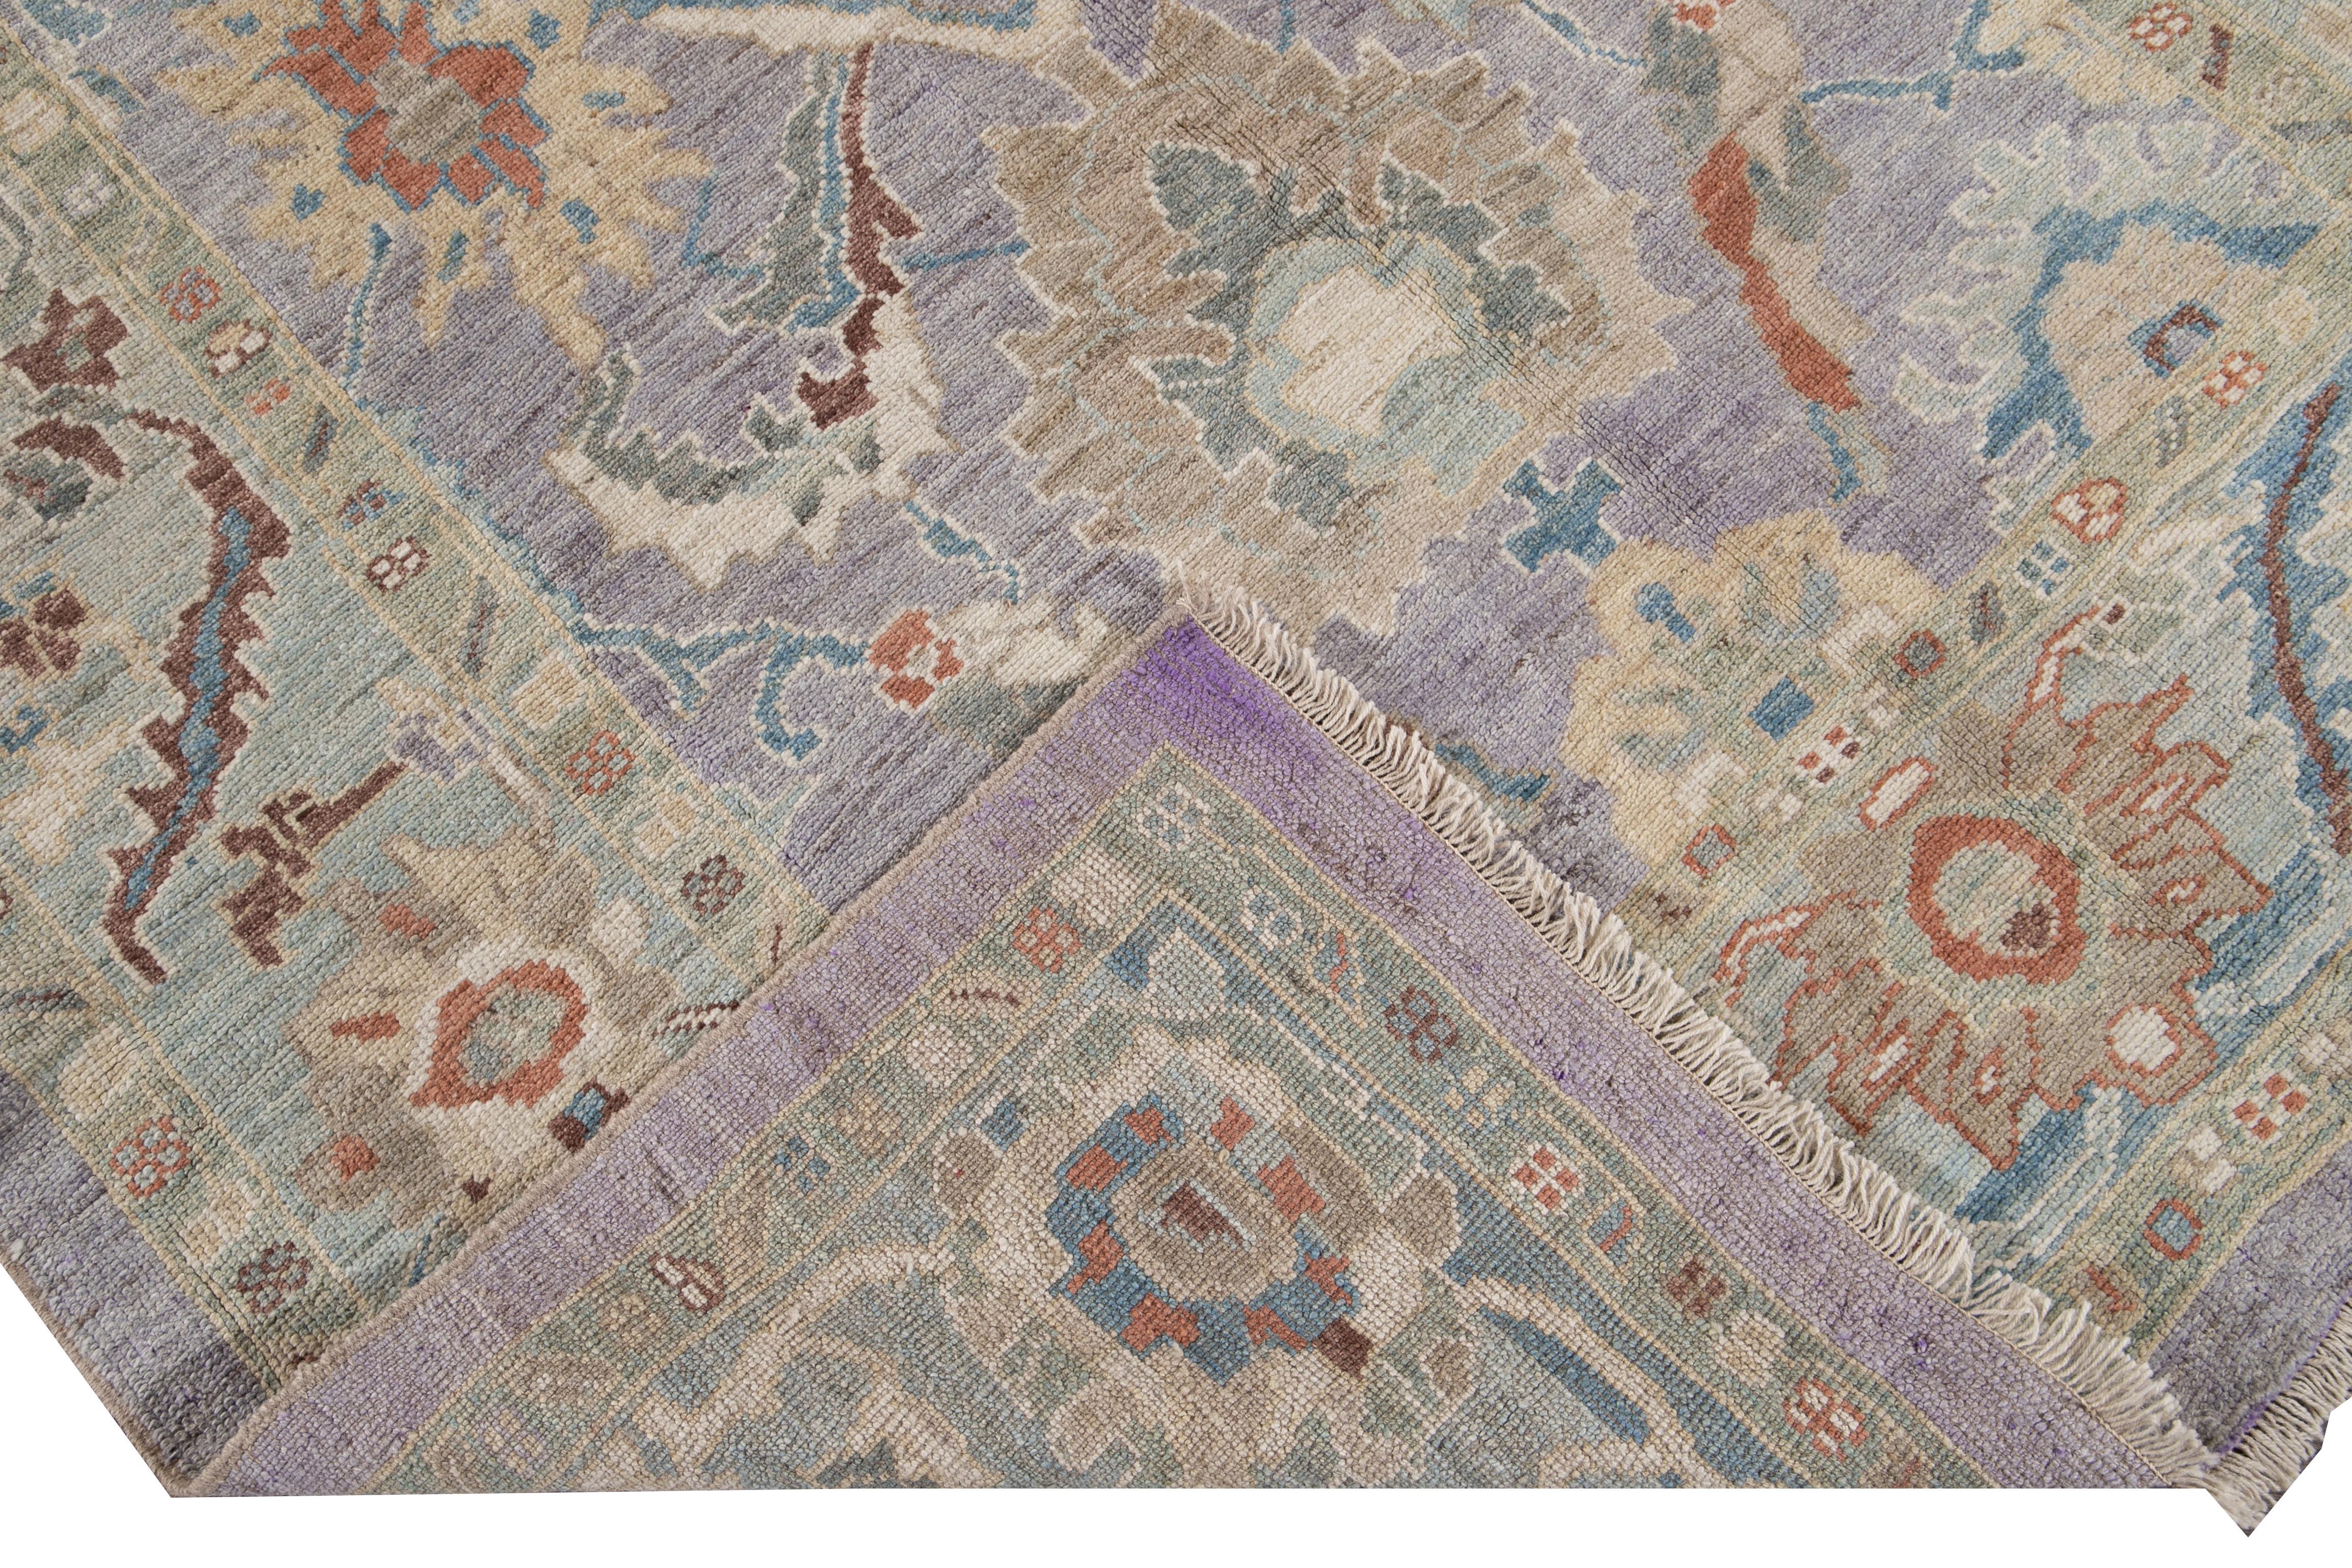 Beautiful modern Sultanabad hand knotted wool rug with a purple field. This Sultanabad rug has a blue frame and multi-color accent in a gorgeous all-over Classic floral medallion design.

This rug measures: 6' x 8'5